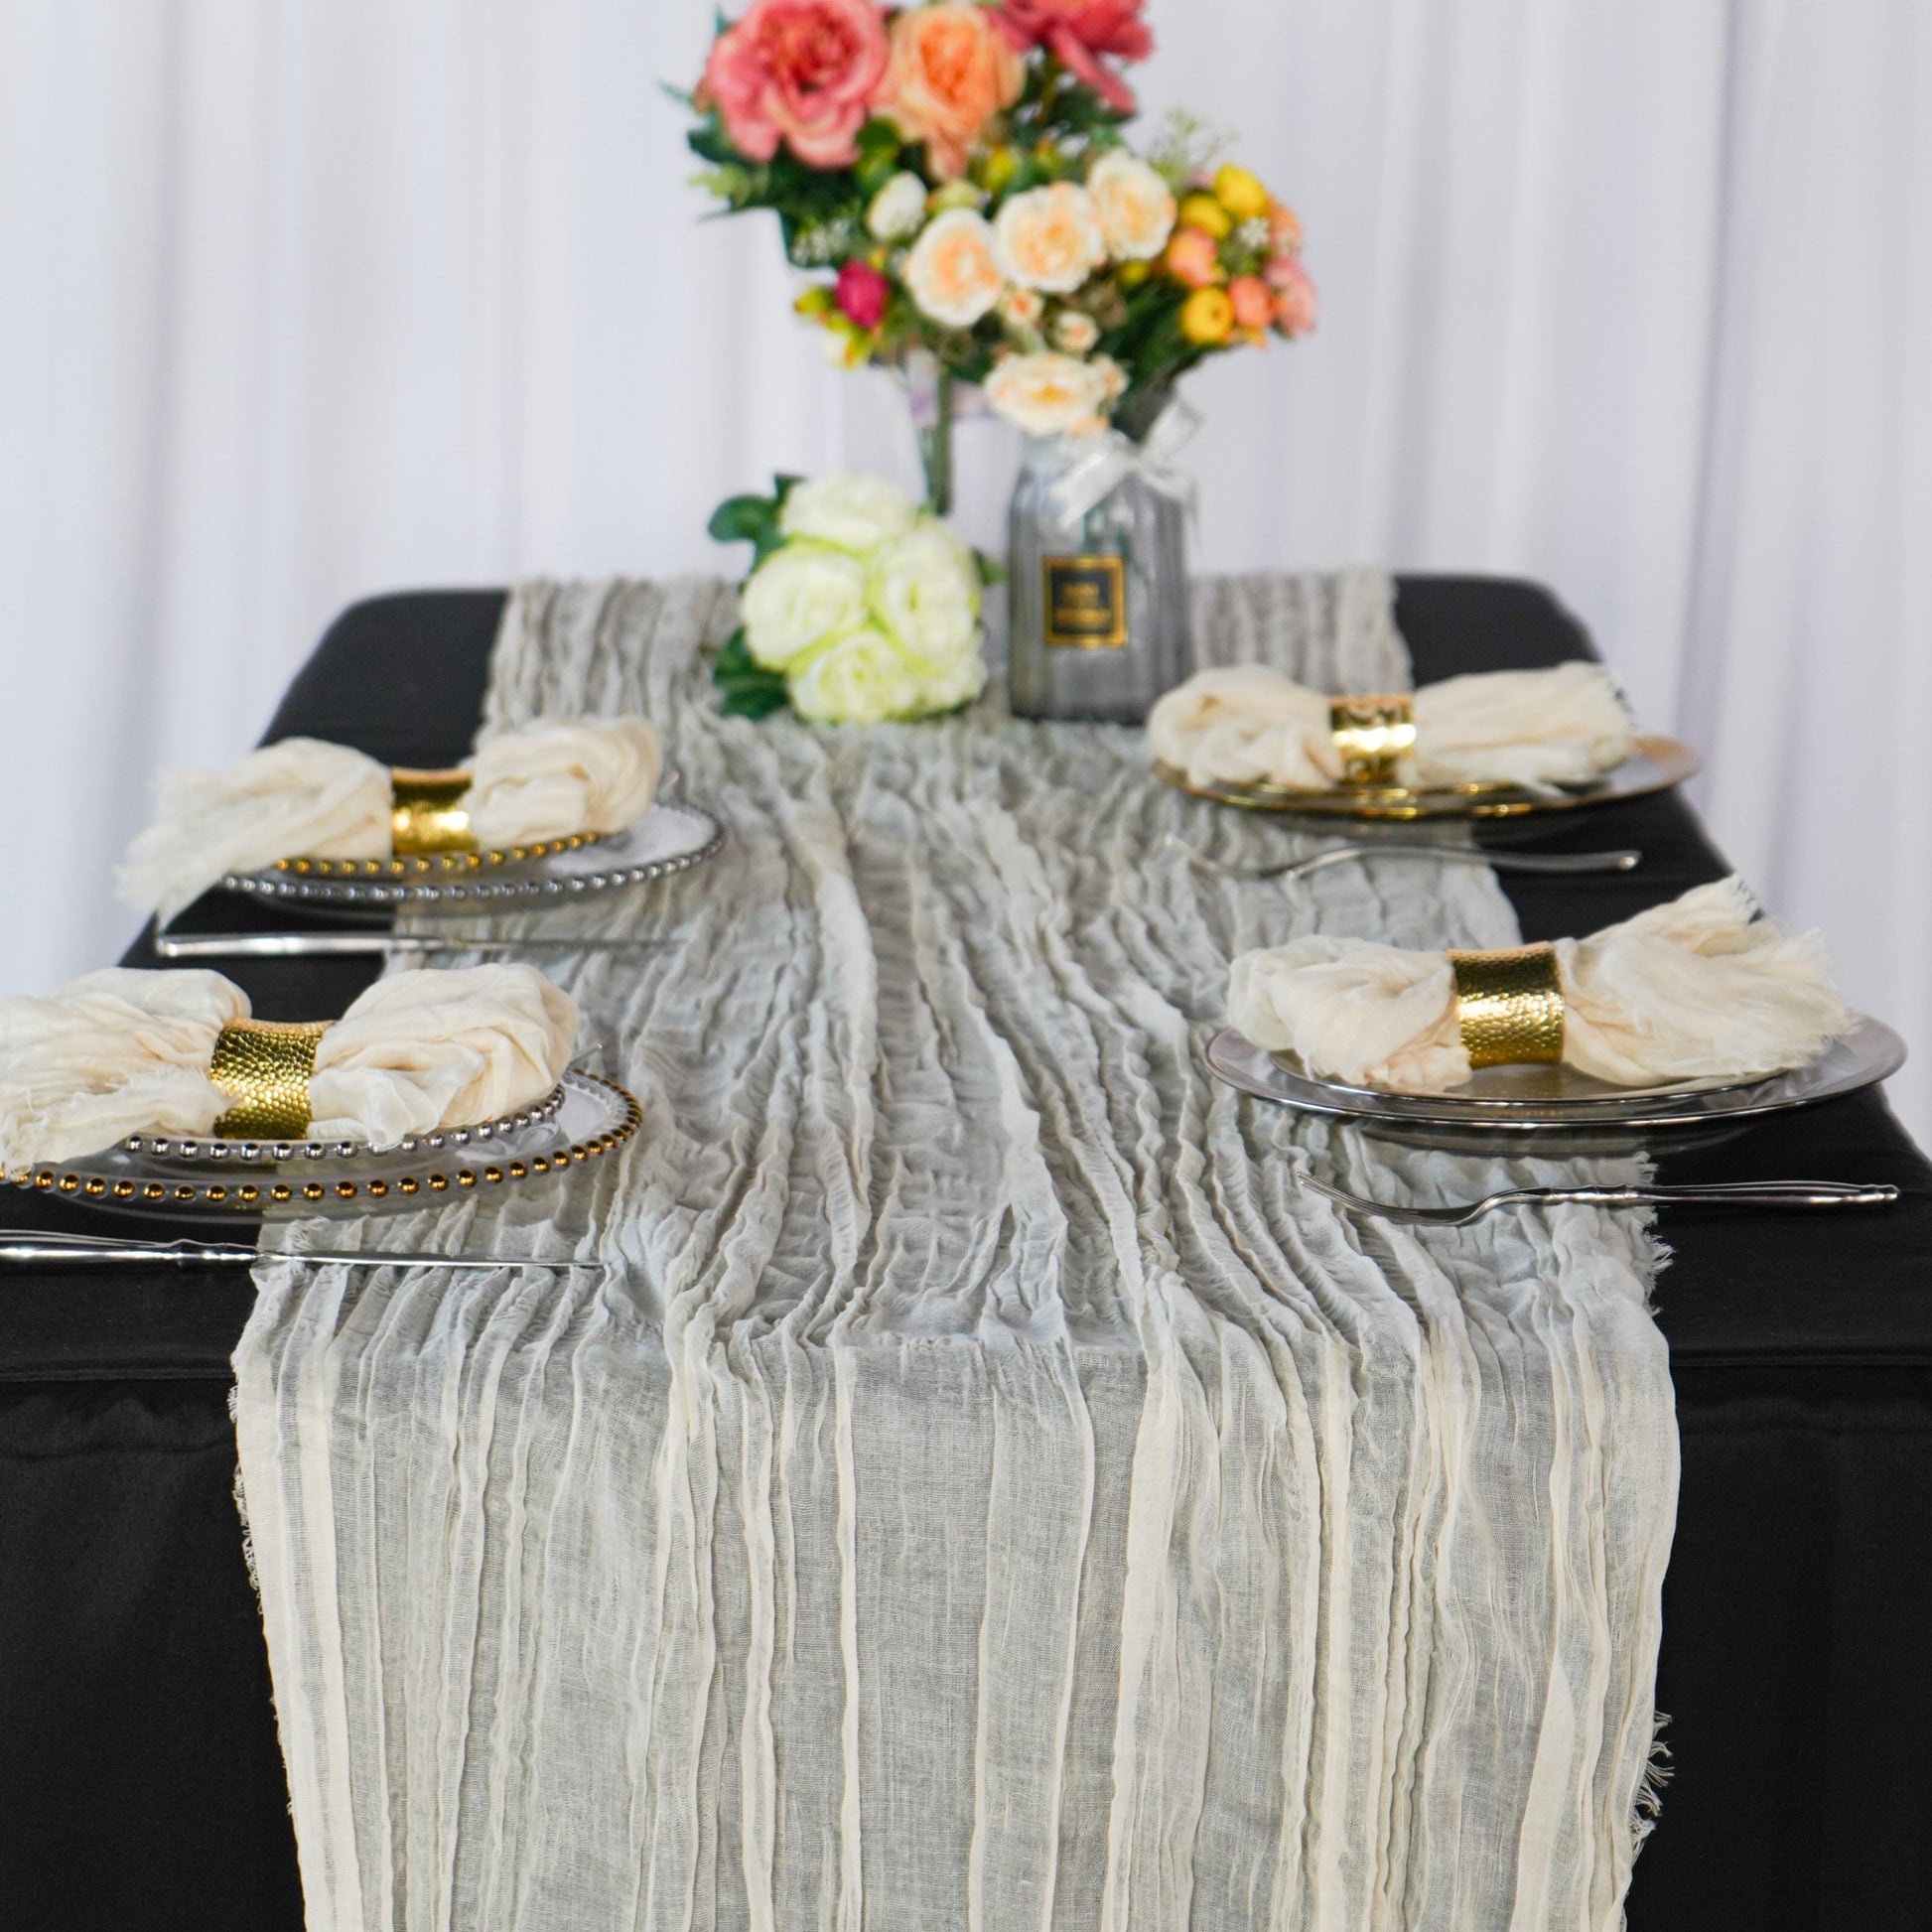 Premium Cheesecloth Table Runner 16FT x 25" - Ivory